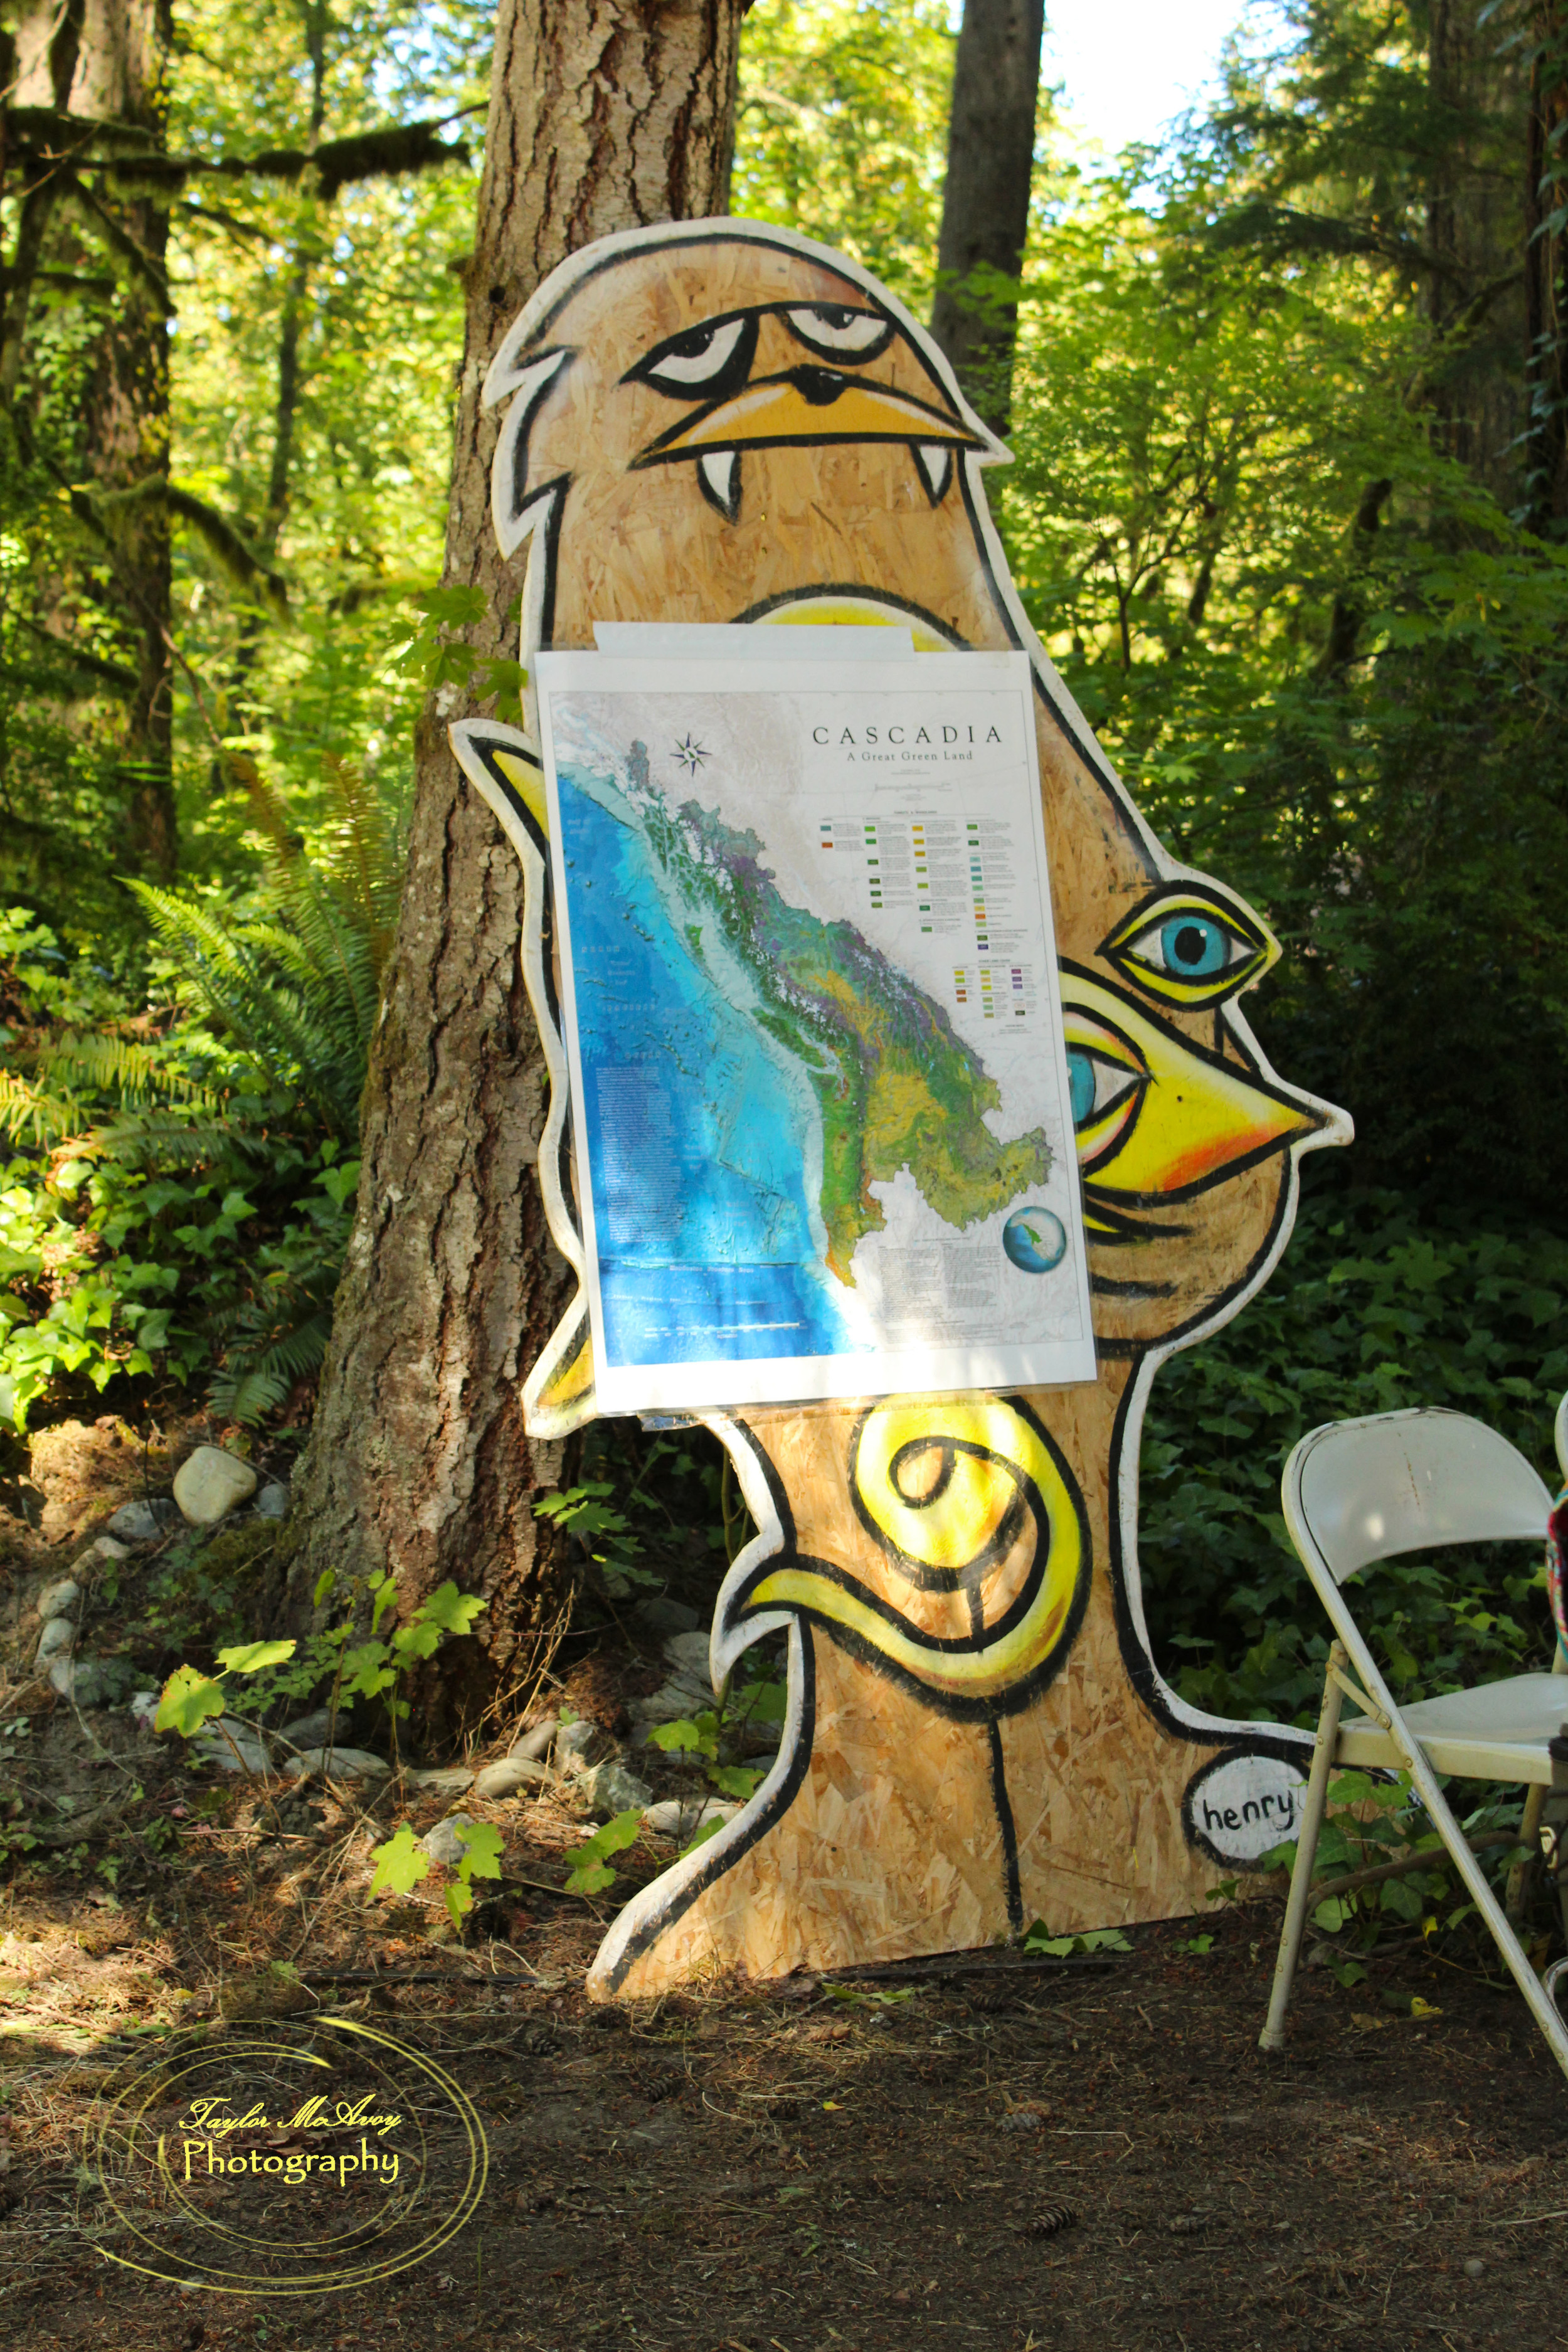  Our resident Sasquatch was one of the few surrounding camp, seen here holding the map of the Cascadia bio-region for Brandon Letsinger's workshop. The Sasquatch and octopus was painted by Seattle artist Ryan Henry Ward. 